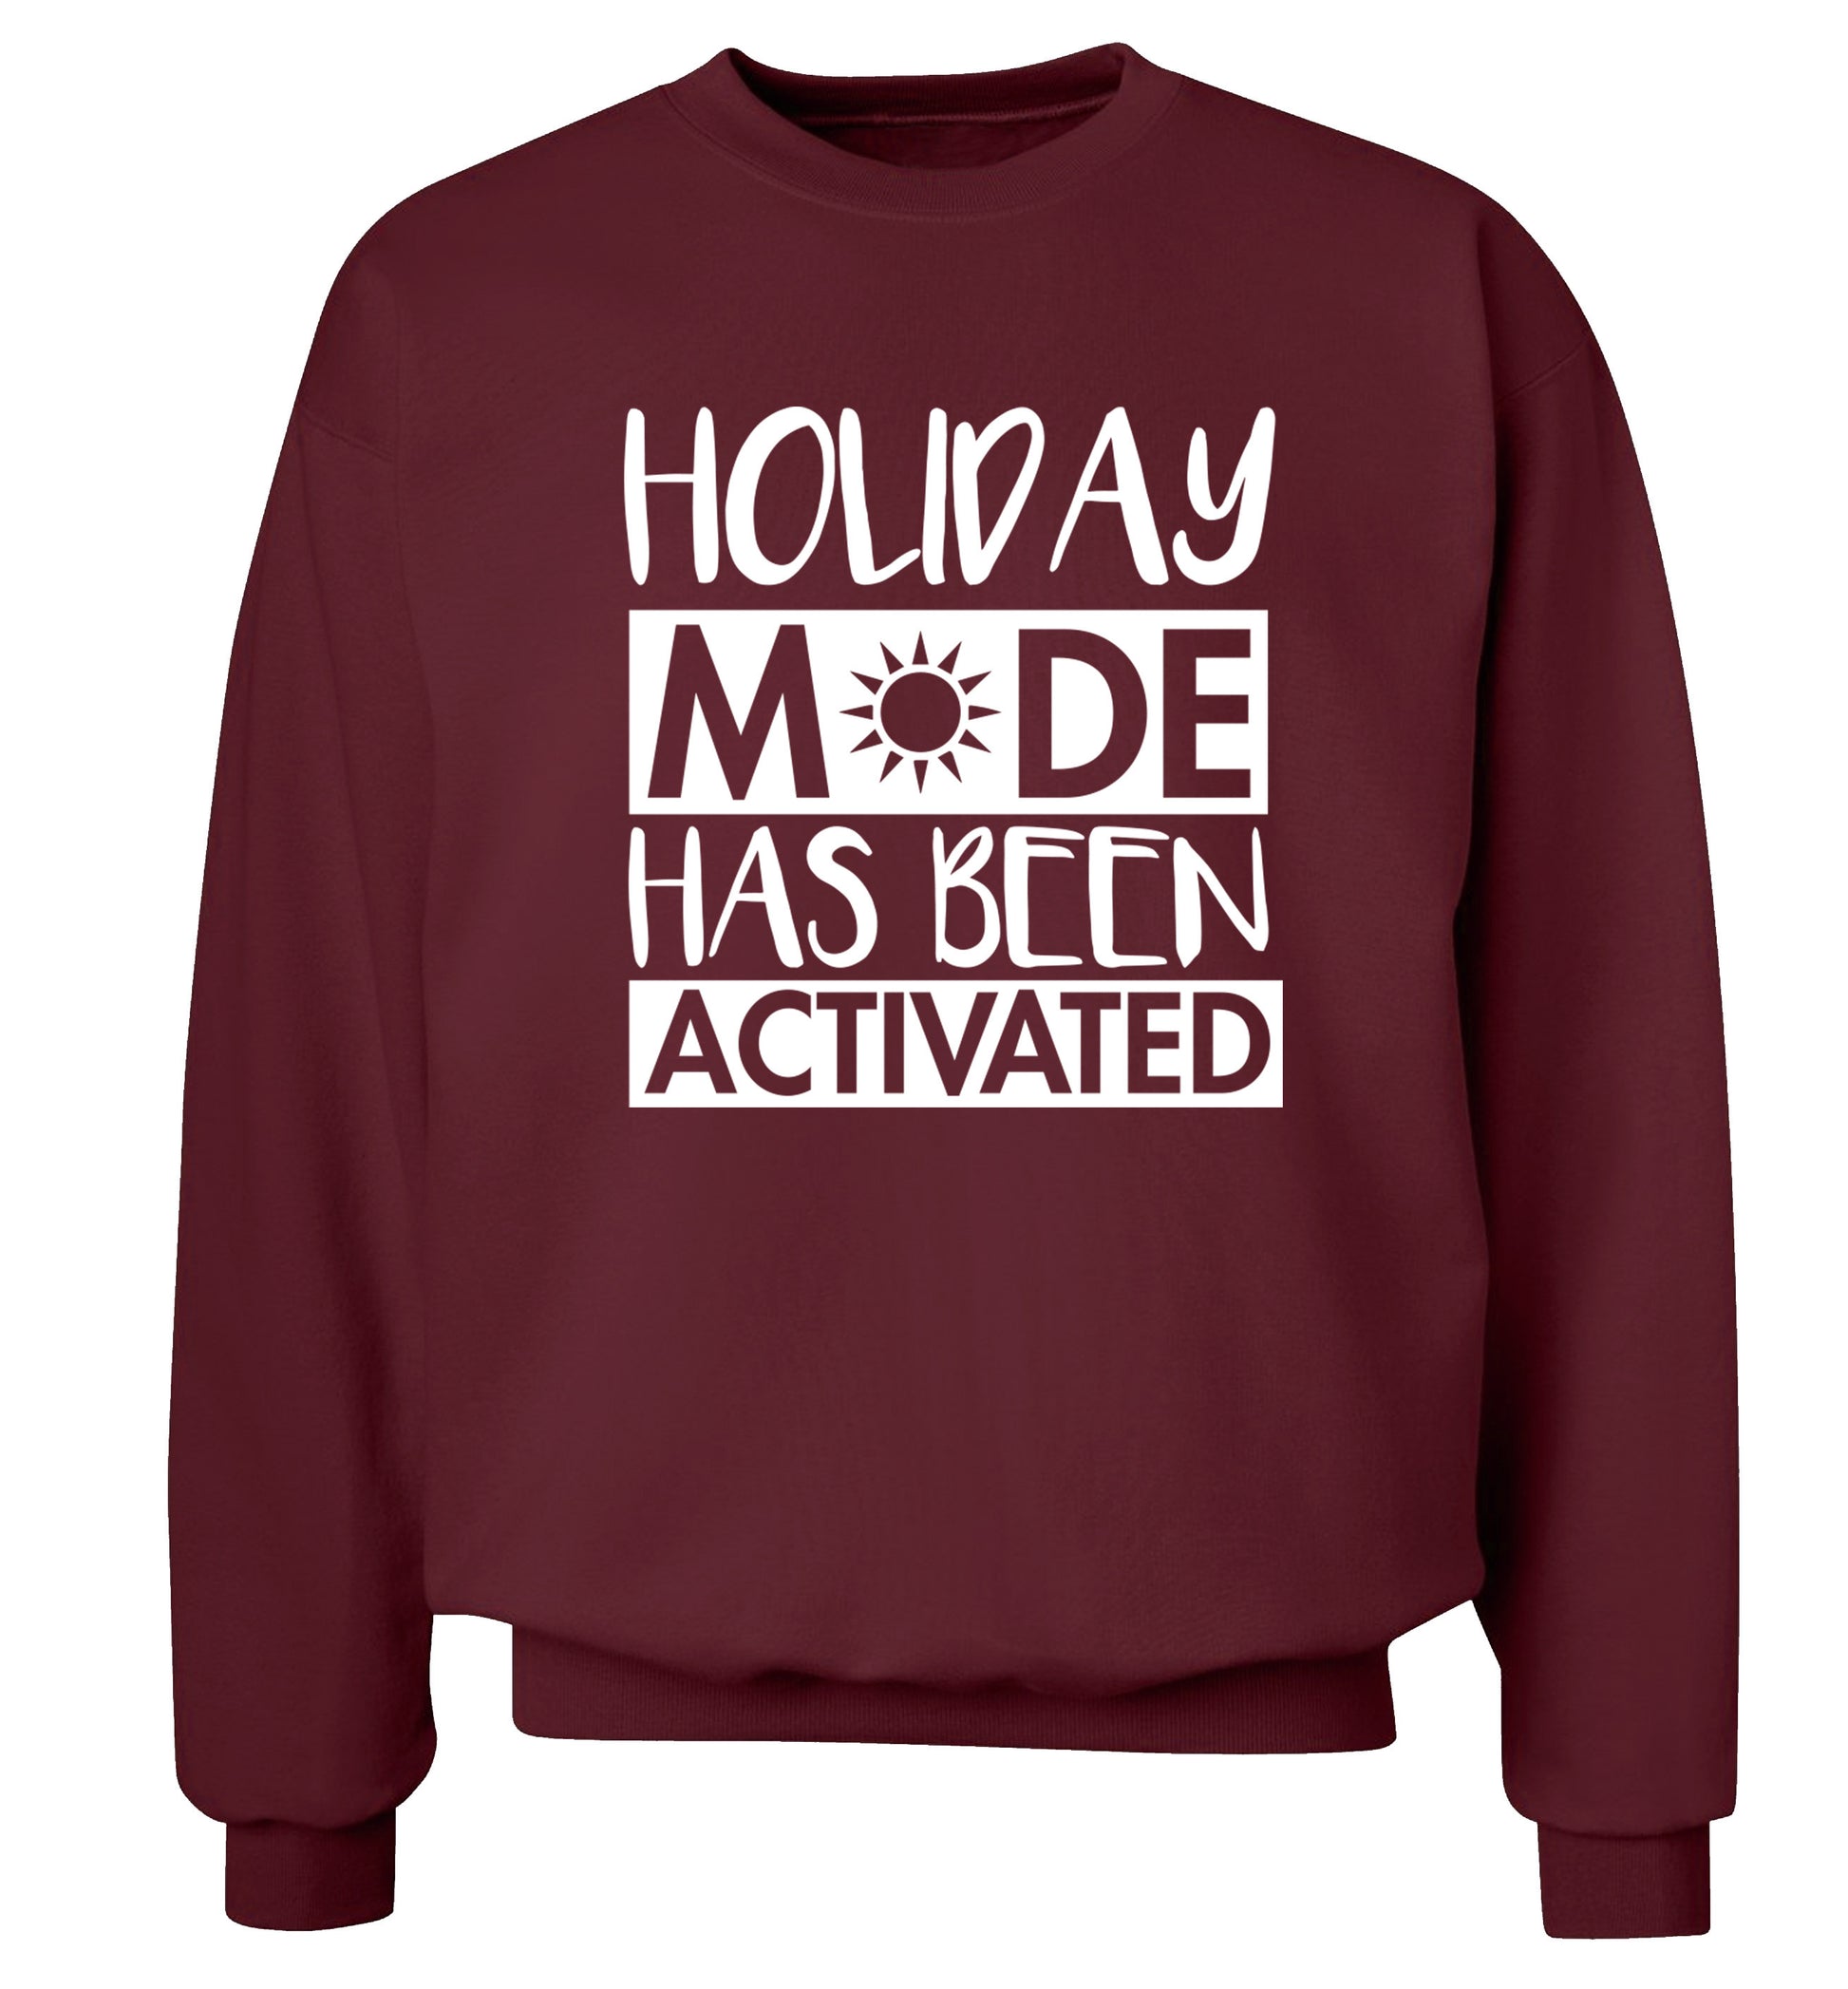 Holiday mode has been activated Adult's unisex maroon Sweater 2XL